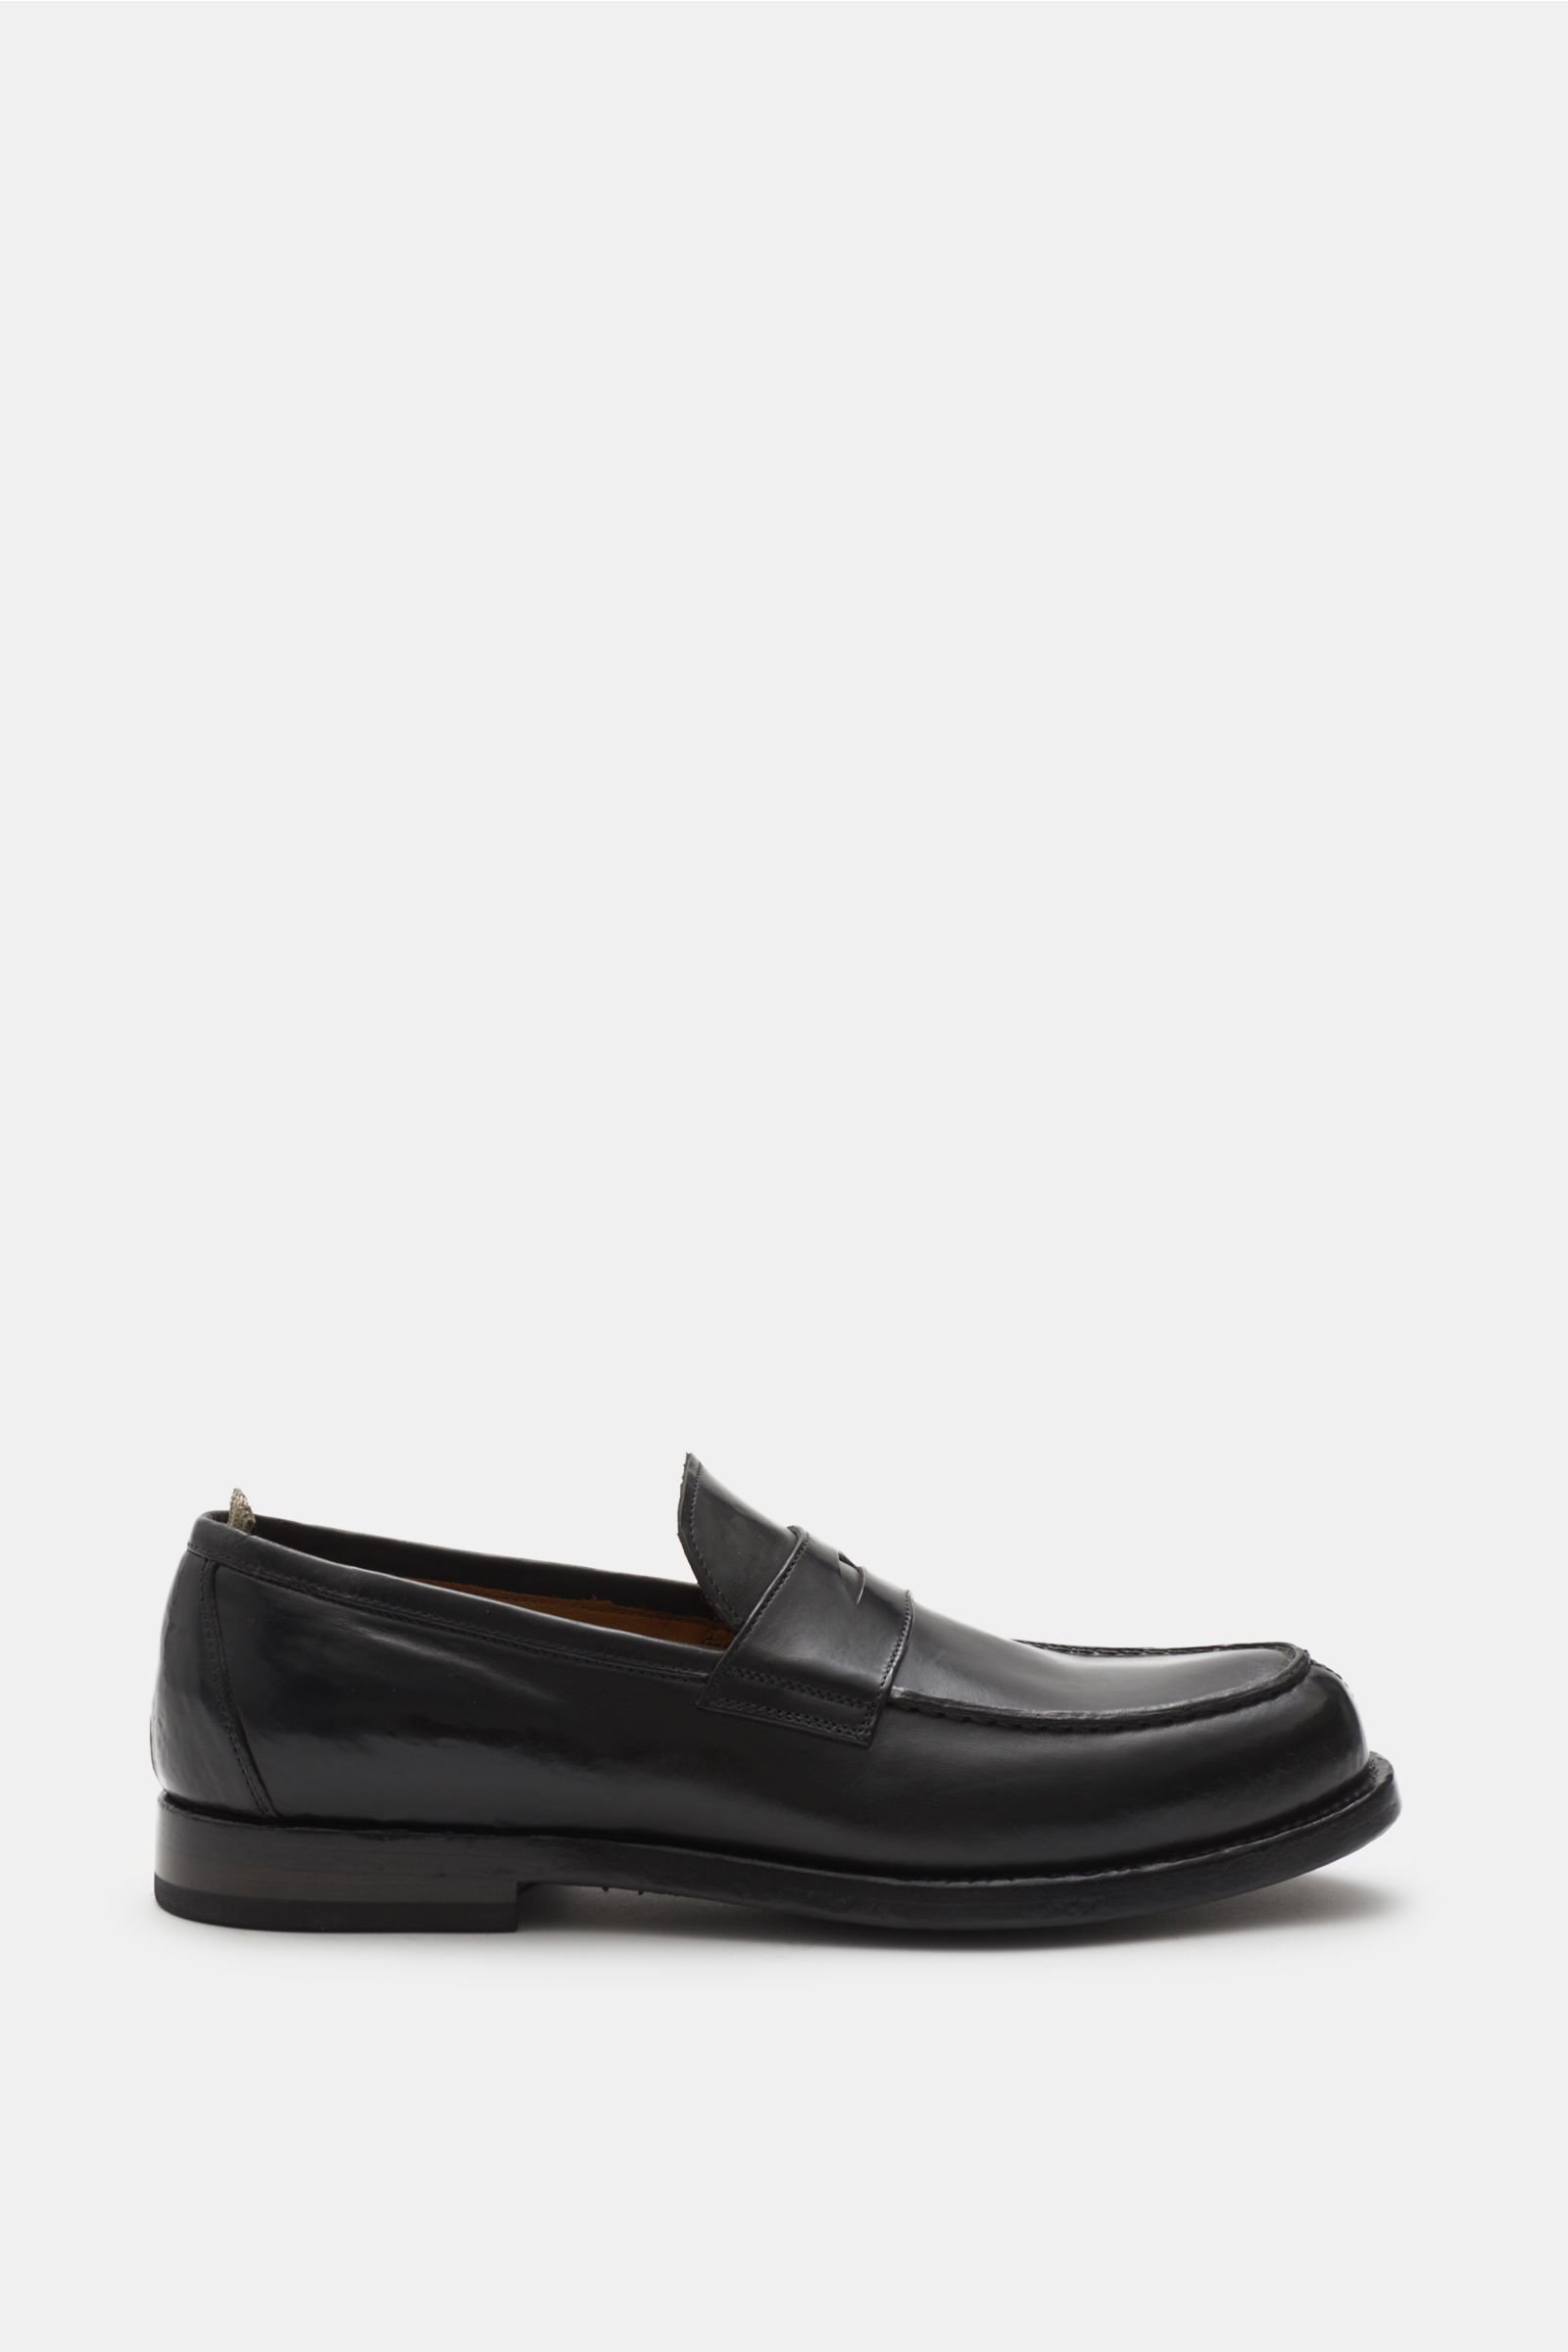 officine creative penny loafers